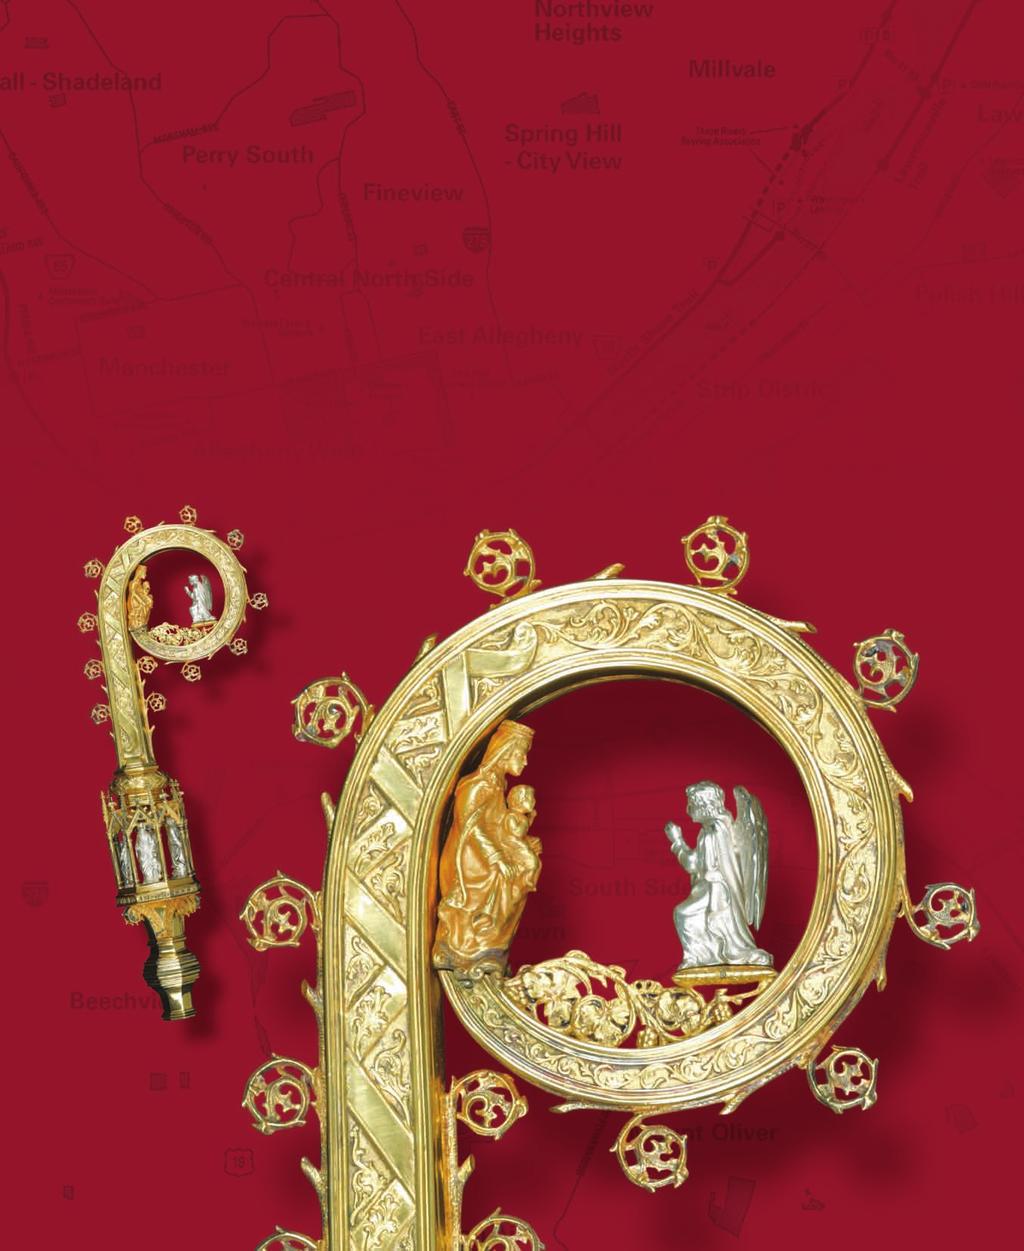 A 2003 biography of Cardinal John Wright. Ornate Crozier: Born in Boston as the son of a factory clerk, Bishop John Wright was one of the diocese s most prolific leaders.